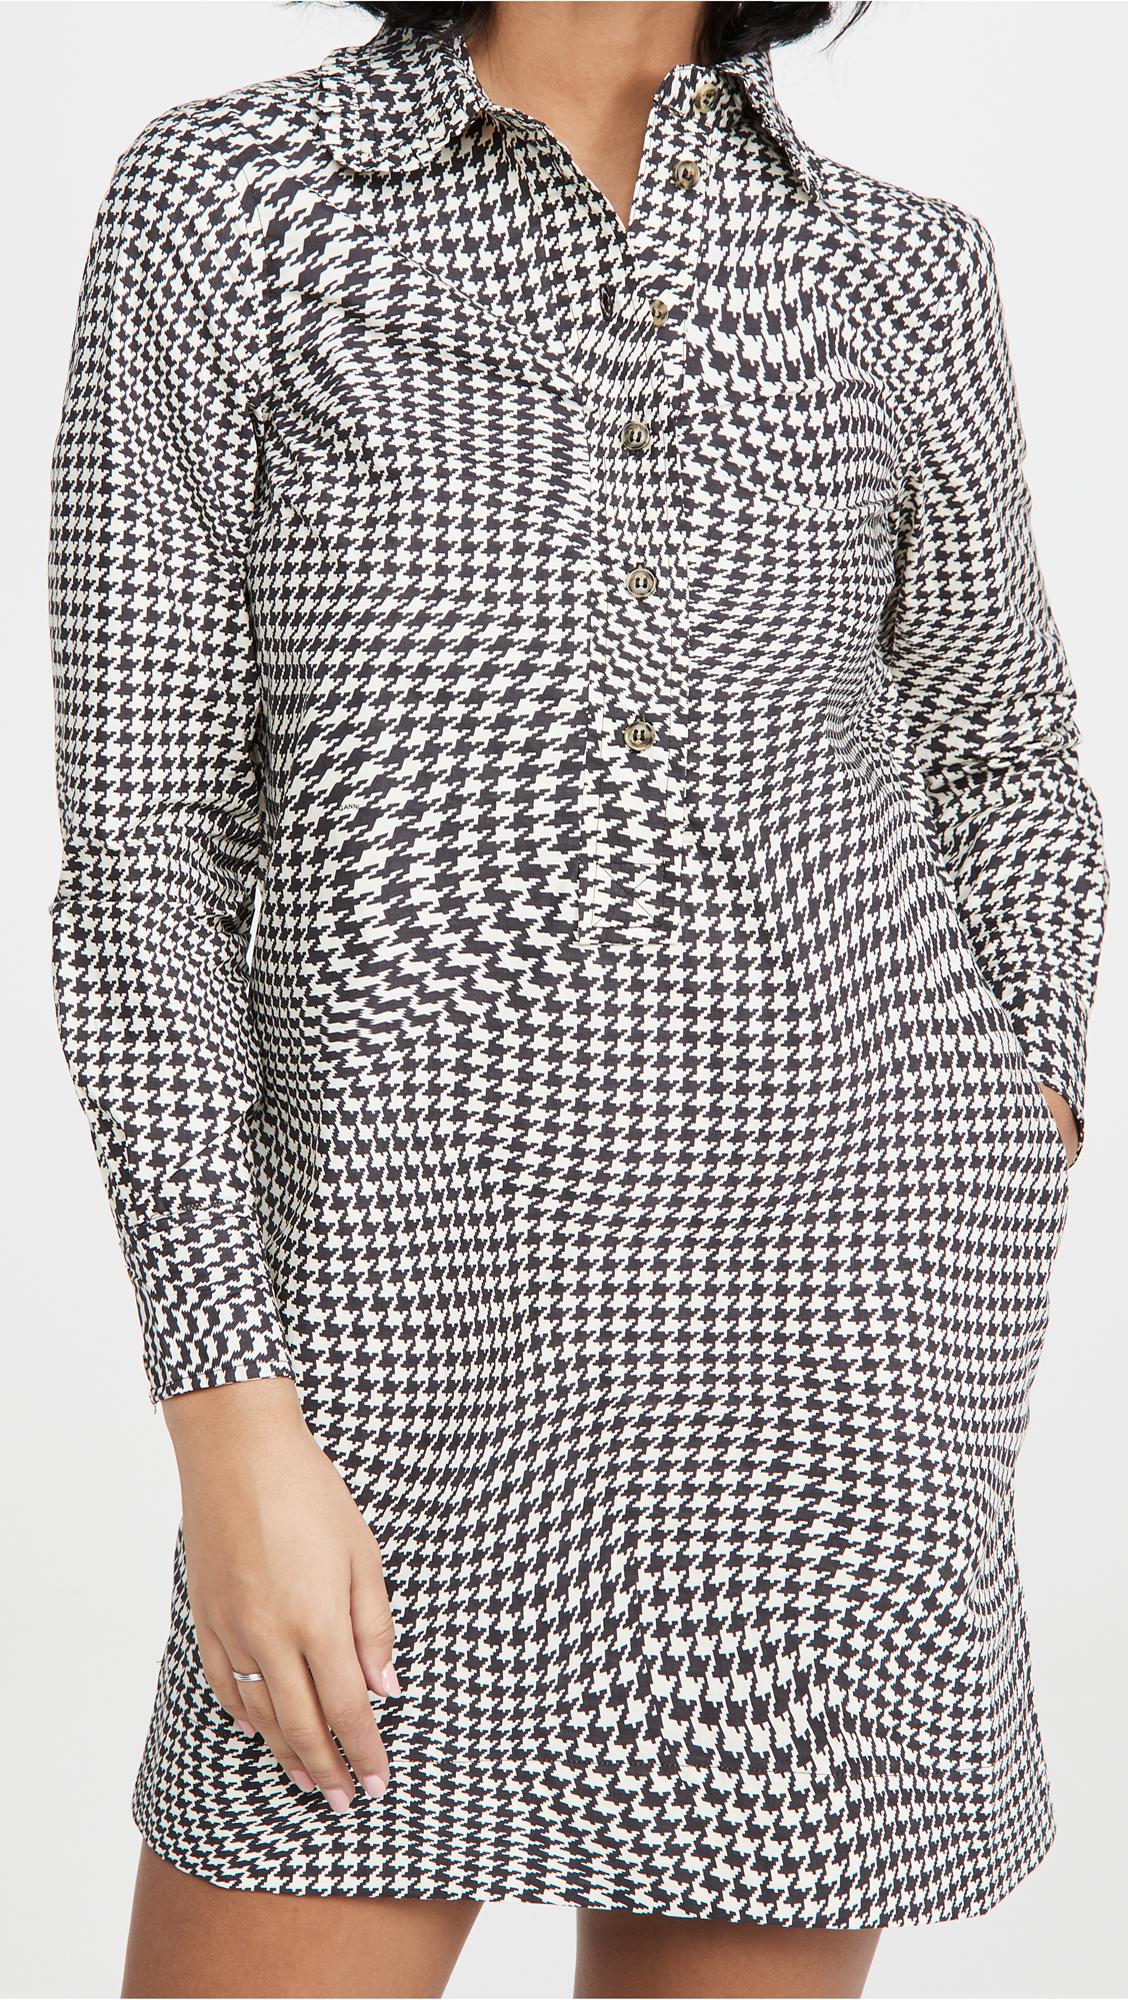 Dress cotton with houndstooth print — blue red white cotton — cotton fabric — stretch cotton — houndstooth print cotton — houndstooth cotton